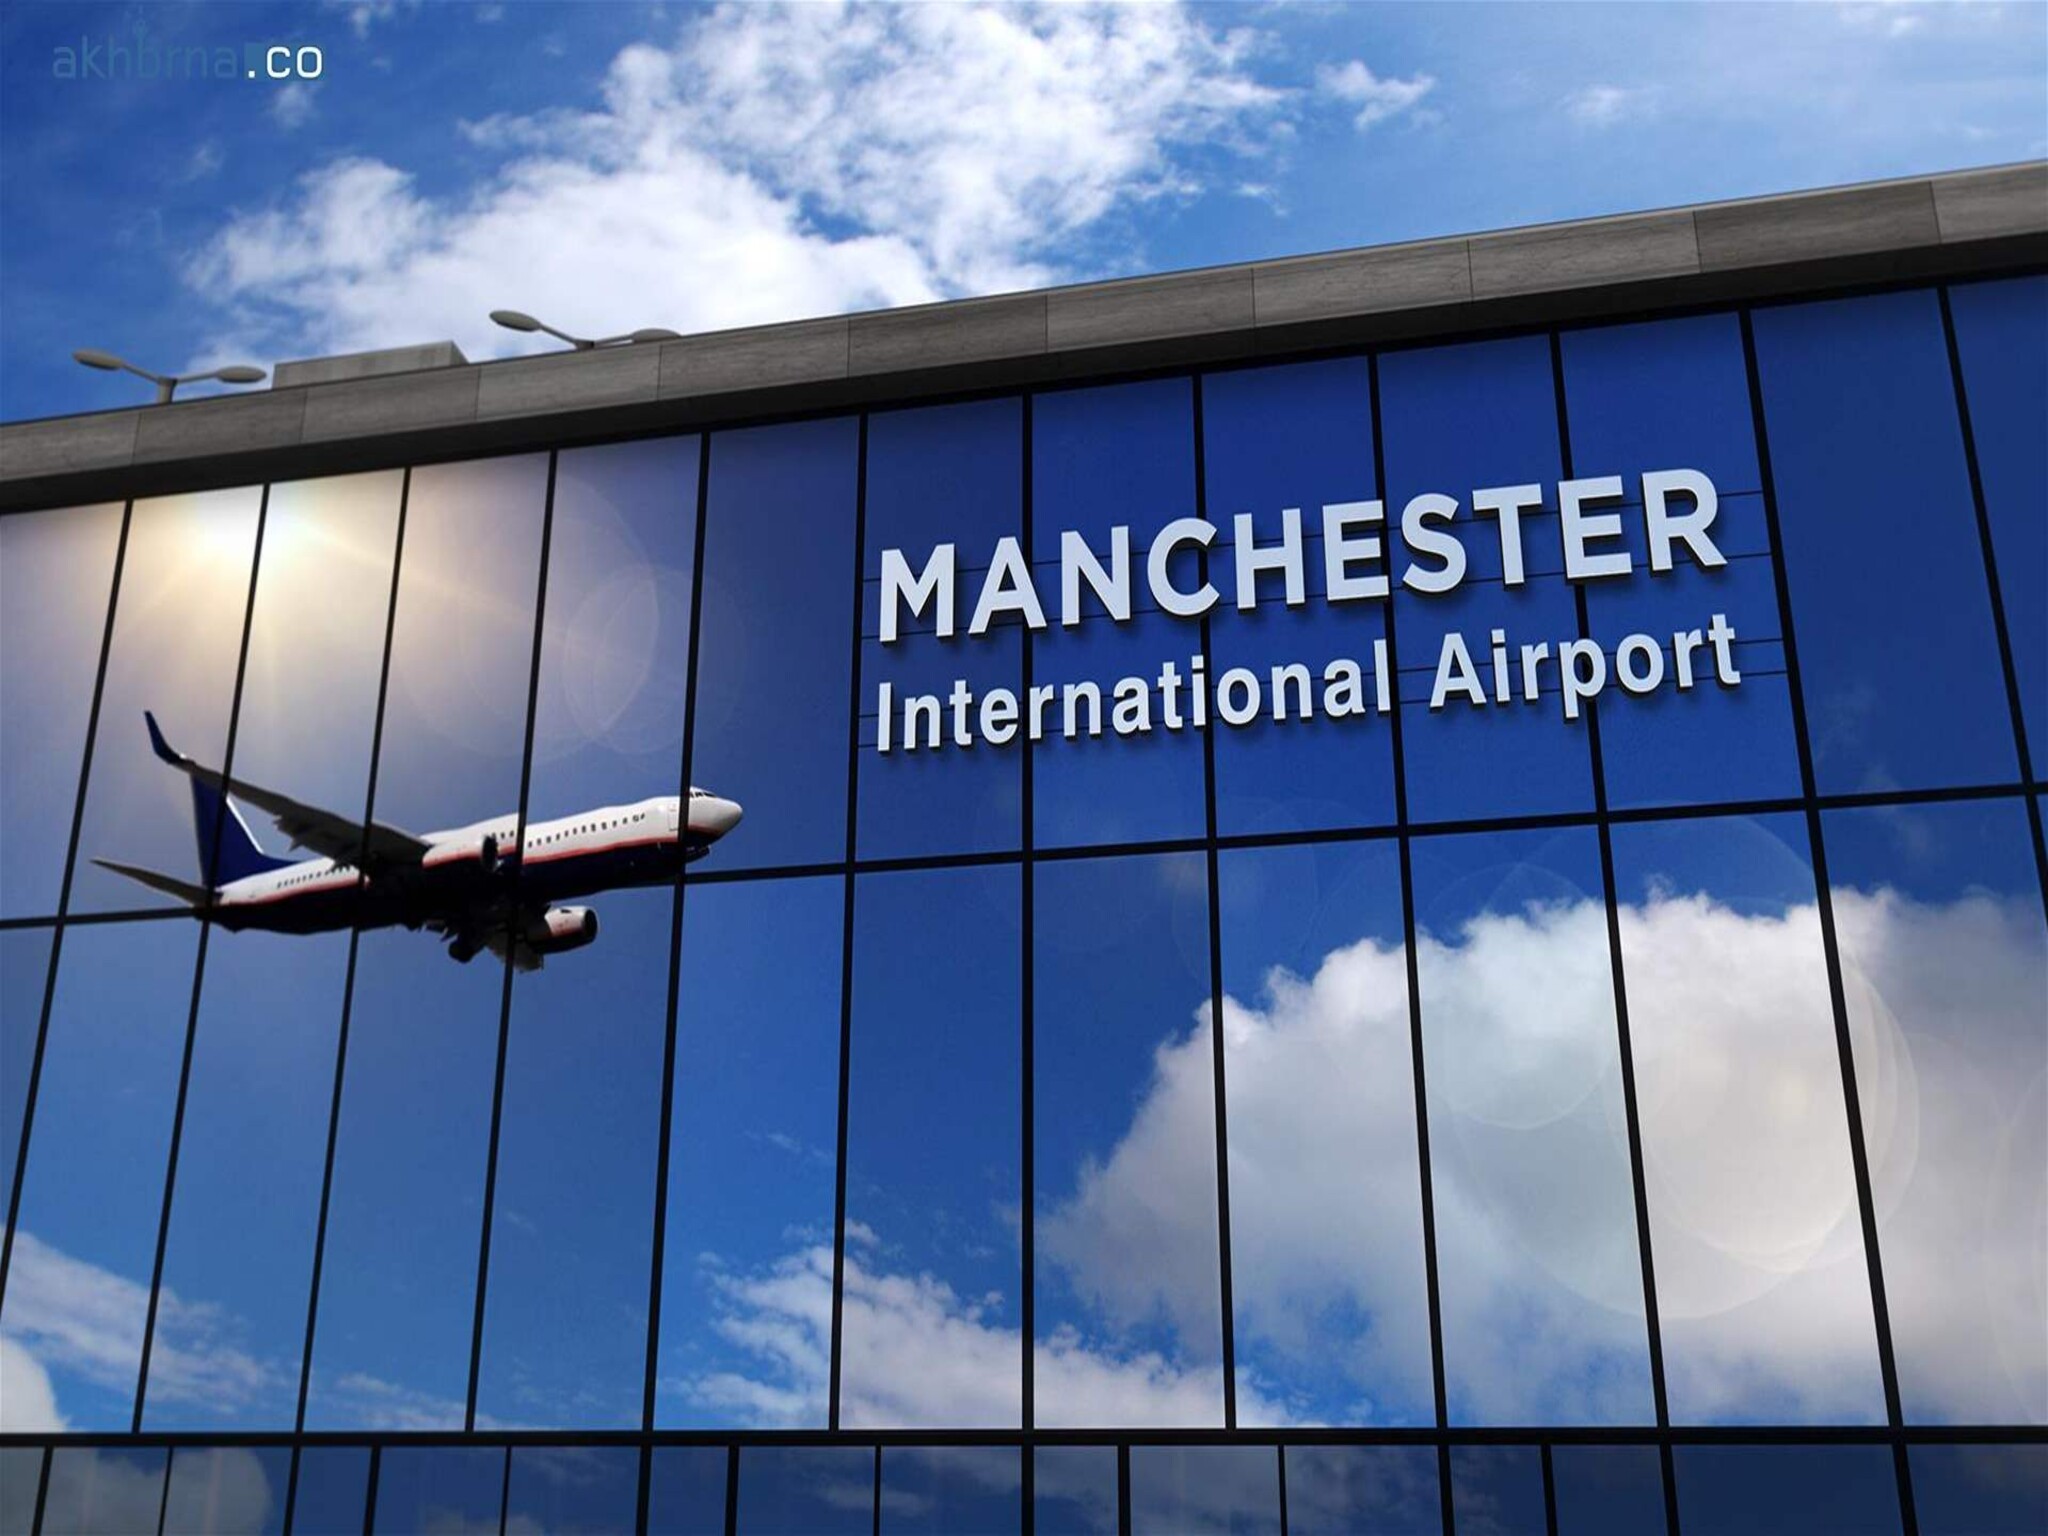 UK Manchester airport  experiences "widespread disruption" due to power outage